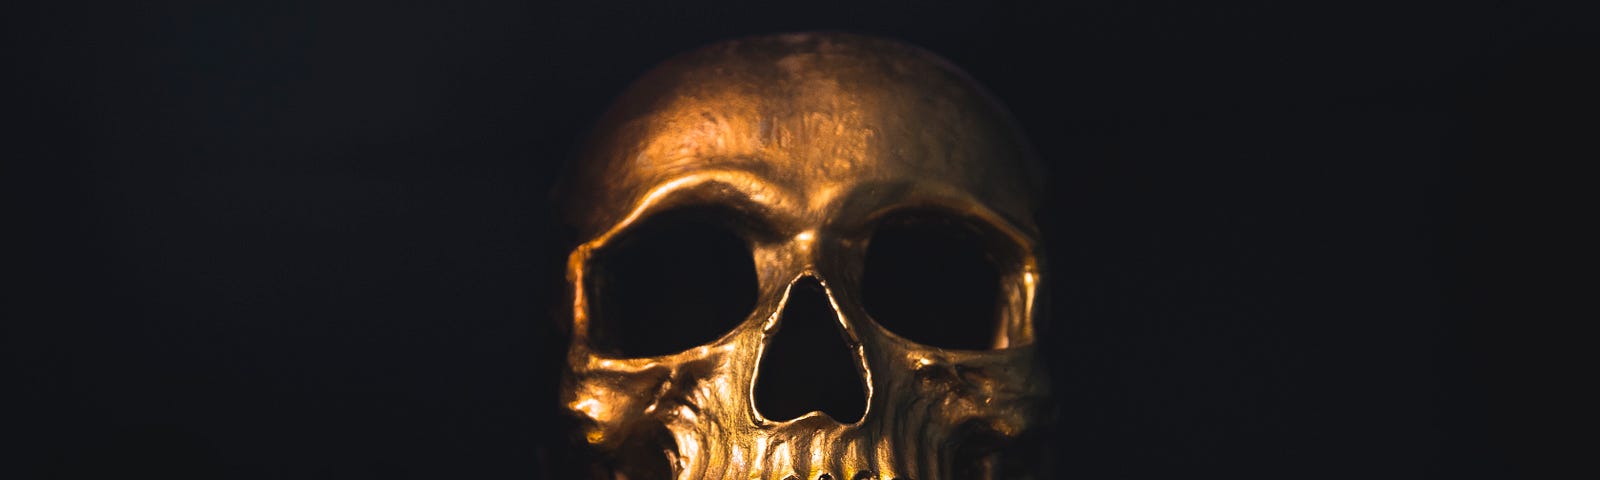 A golden skull shining against a dark background — read to the end of the piece and it will all become clear!